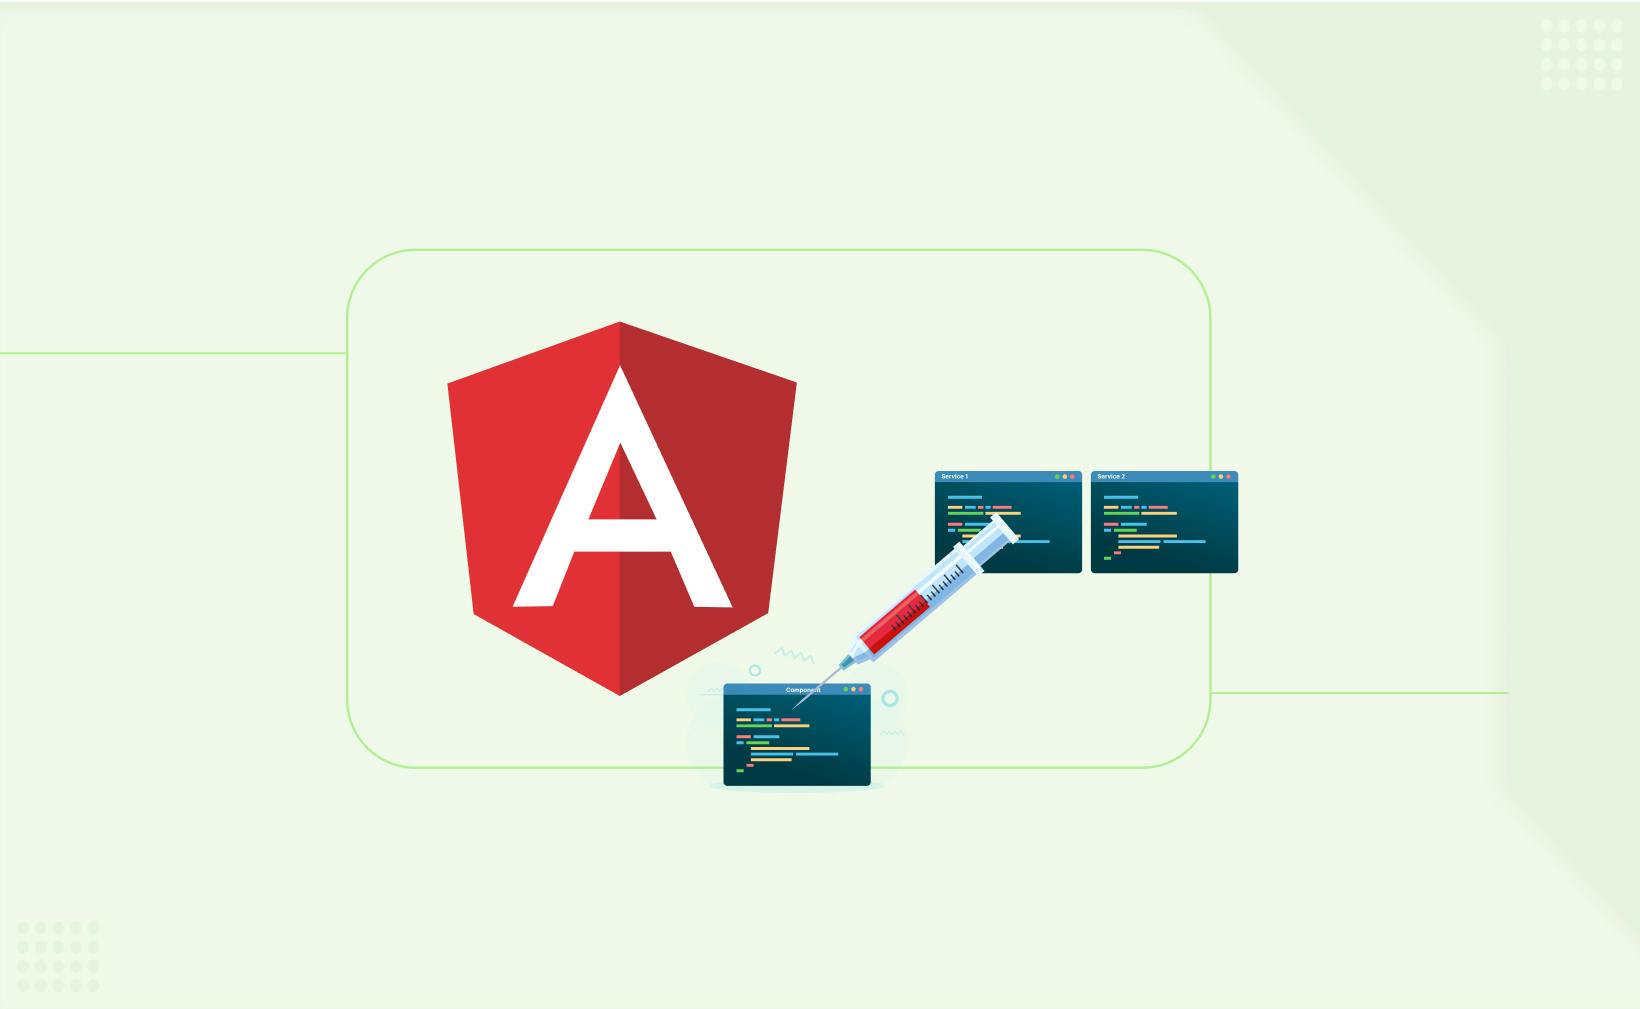 Concepts of Dependency Injection in Angular